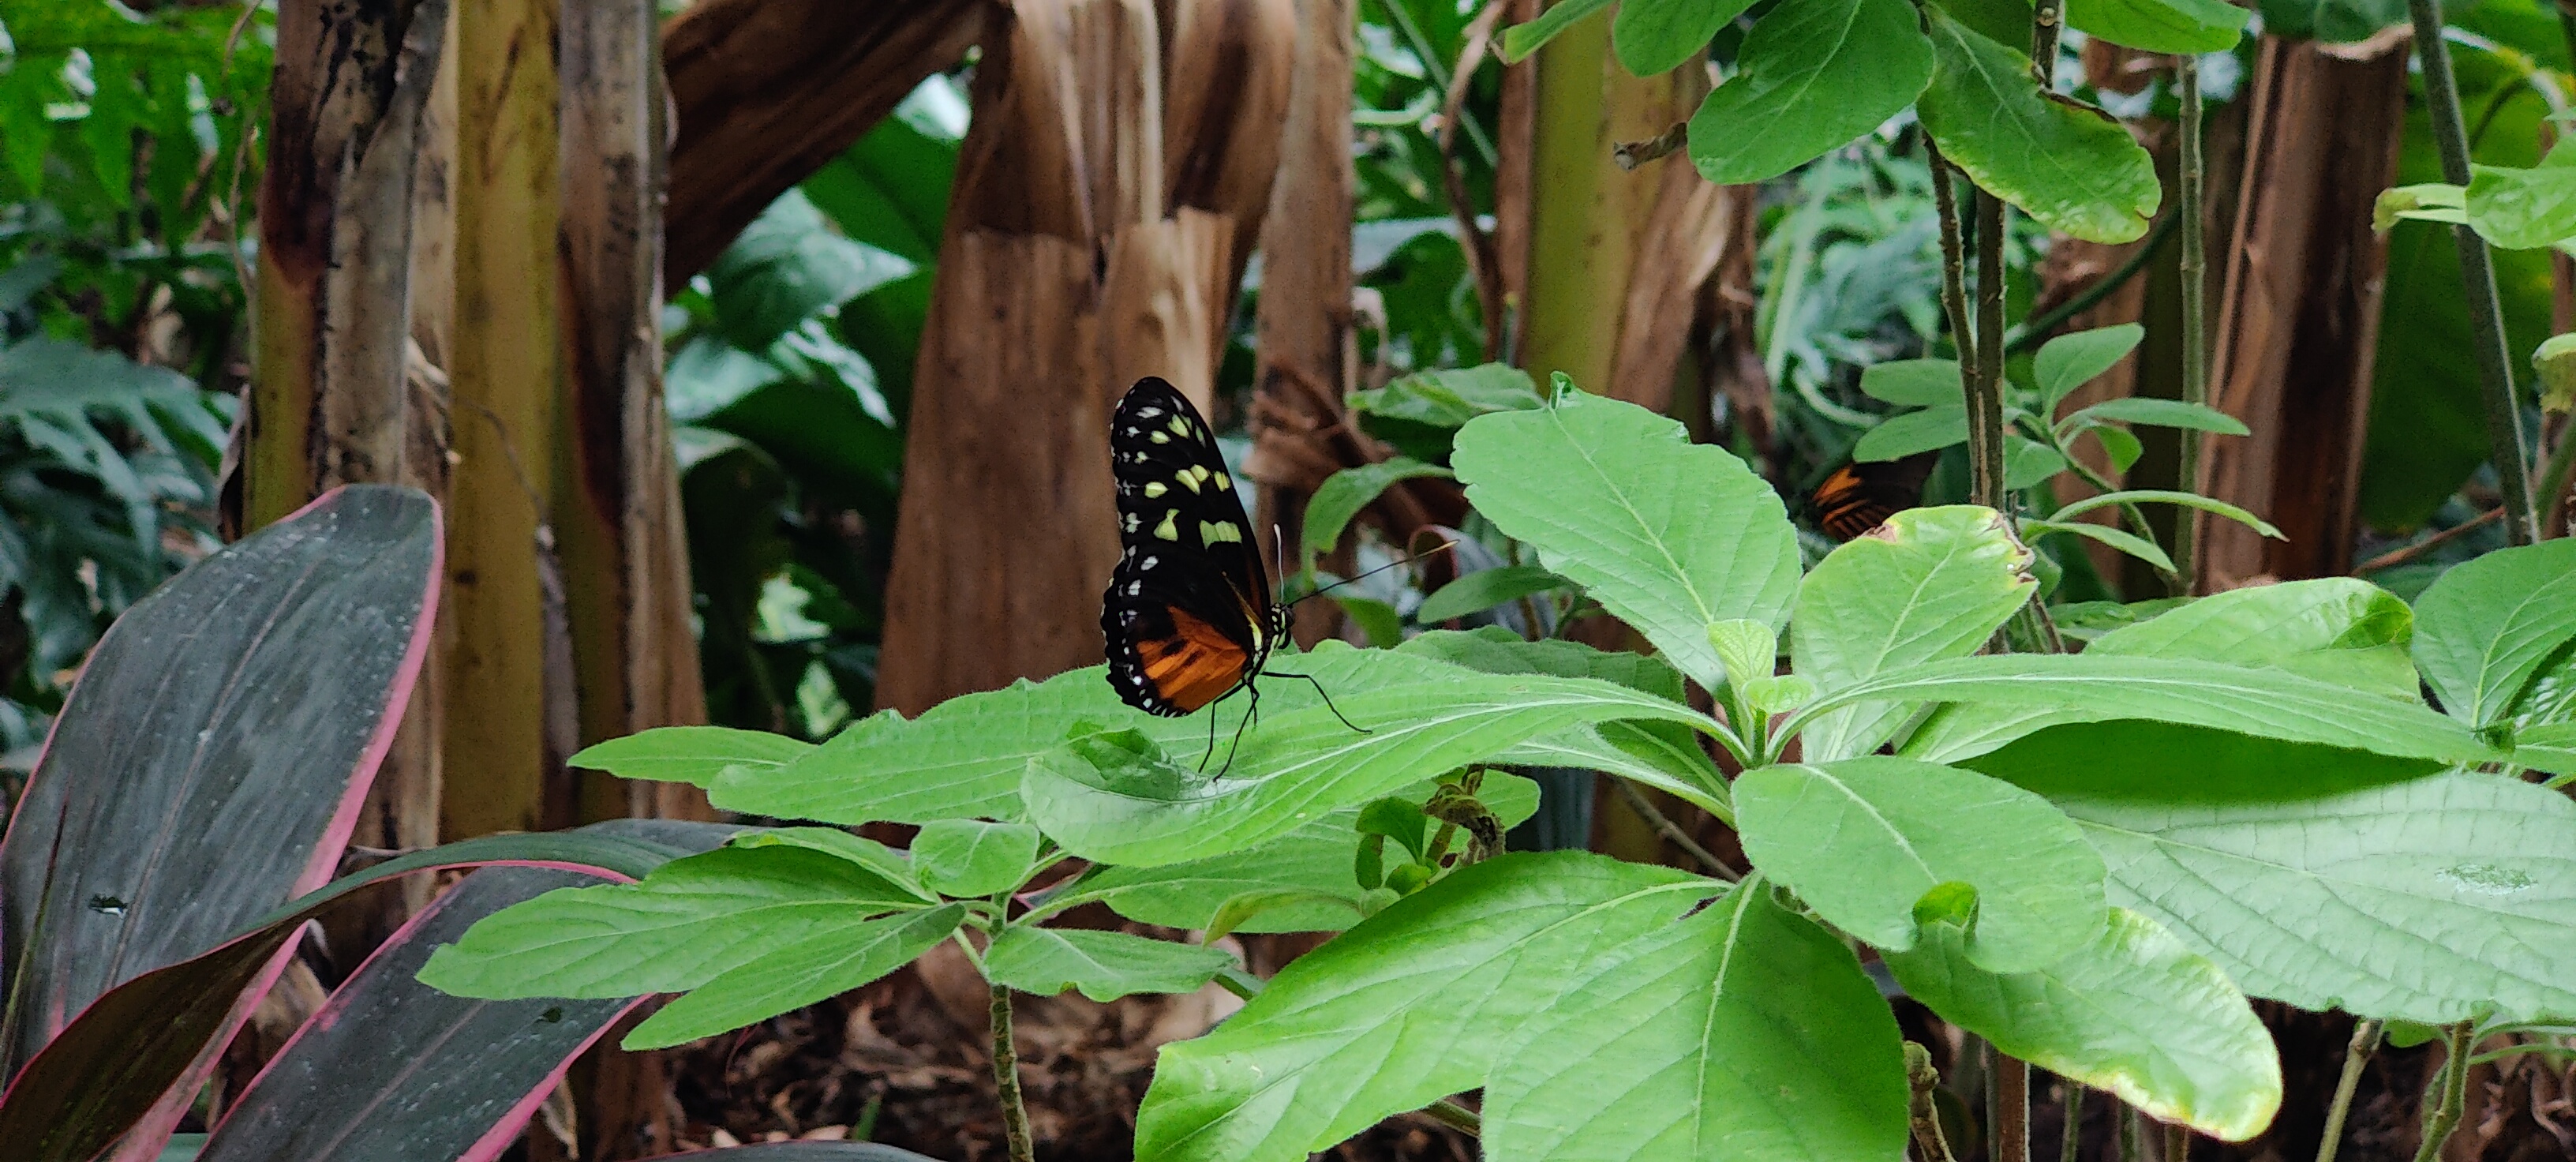 Butterflies are hard to take pictures of. They are surprisingly fast!